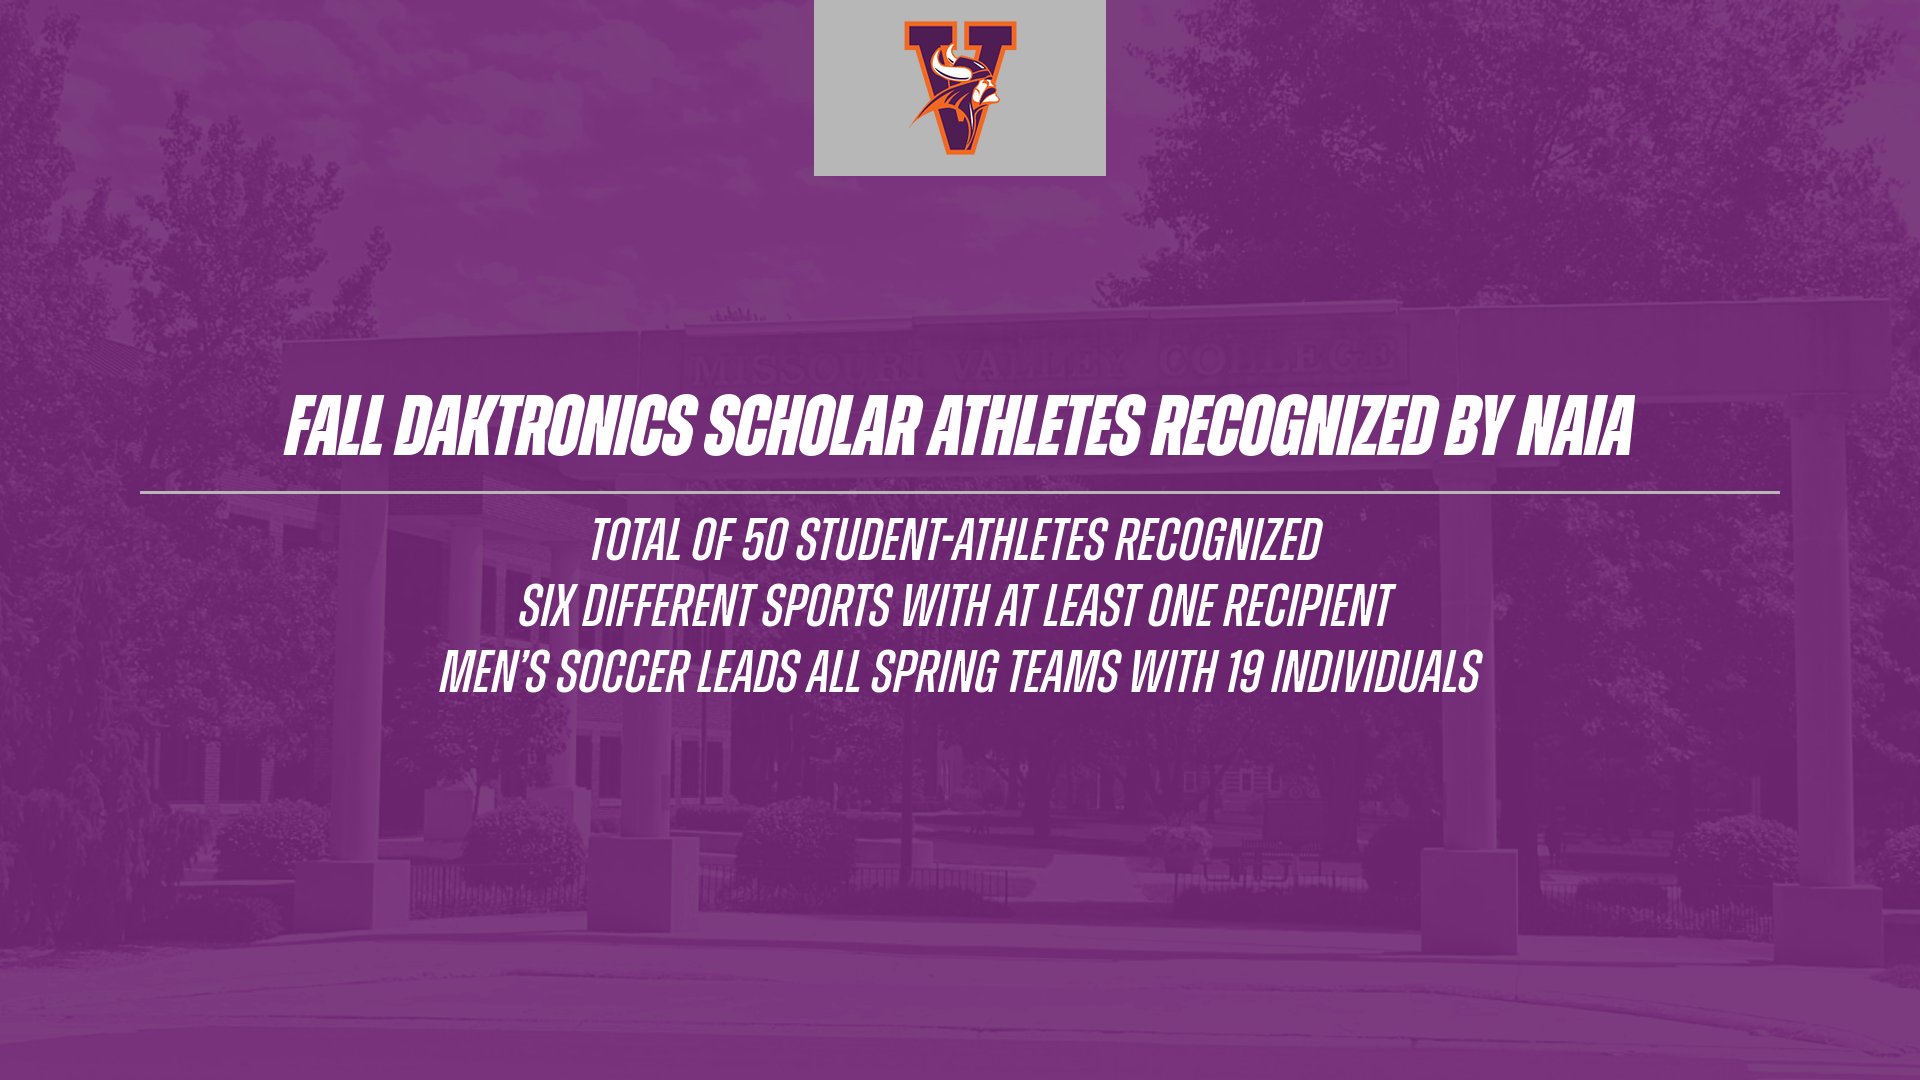 Fifty Missouri Valley College Fall Sport Student-Athletes Earn NAIA Scholar Athlete Honors